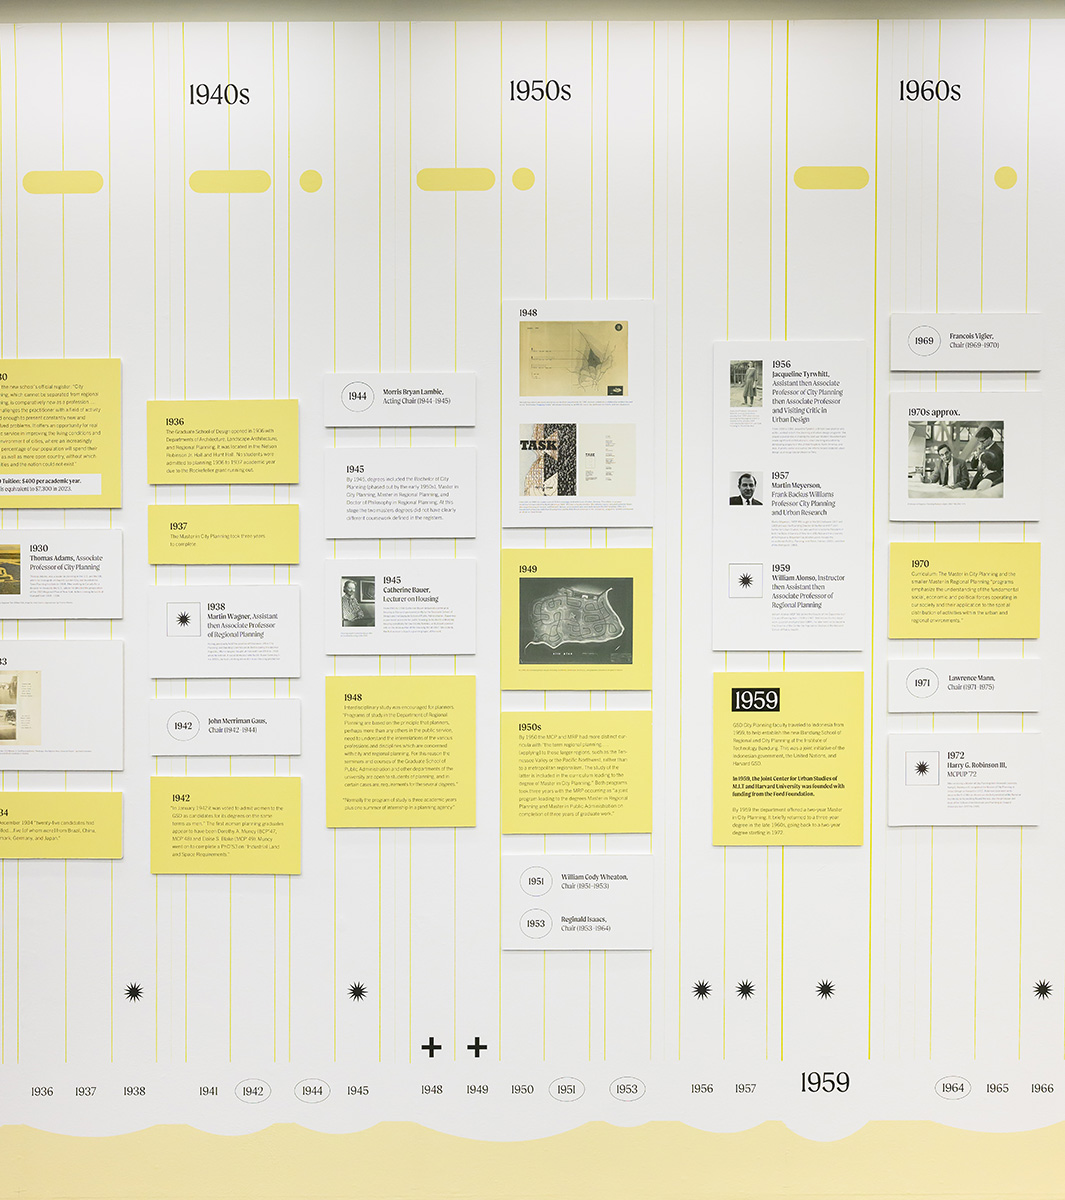 A detail of the timeline showing images and text from the 1940s through 1960s